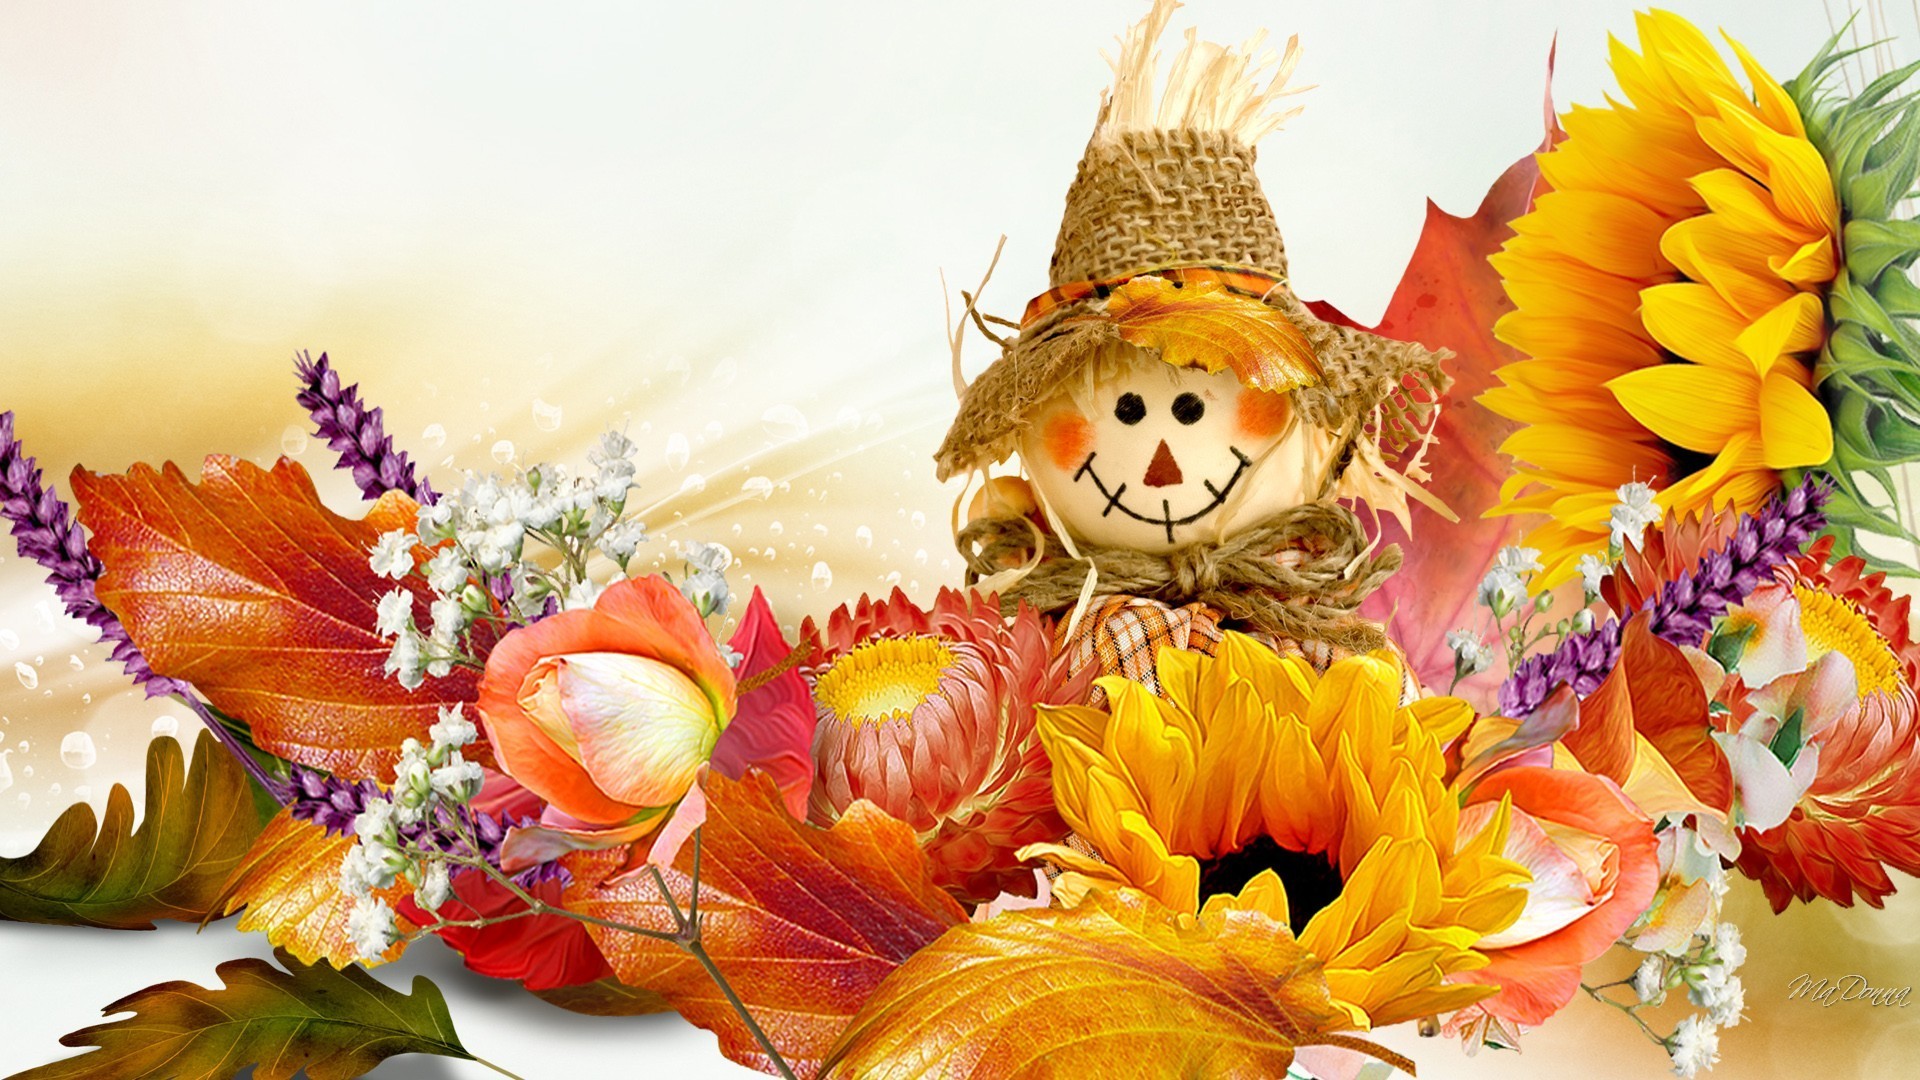 Doll Basics Happy Sunflowers Rose Scarecrow Fall Flowers Smile Gold Autumn  Orange Leaves Flower Wallpaper Theme Download Detail